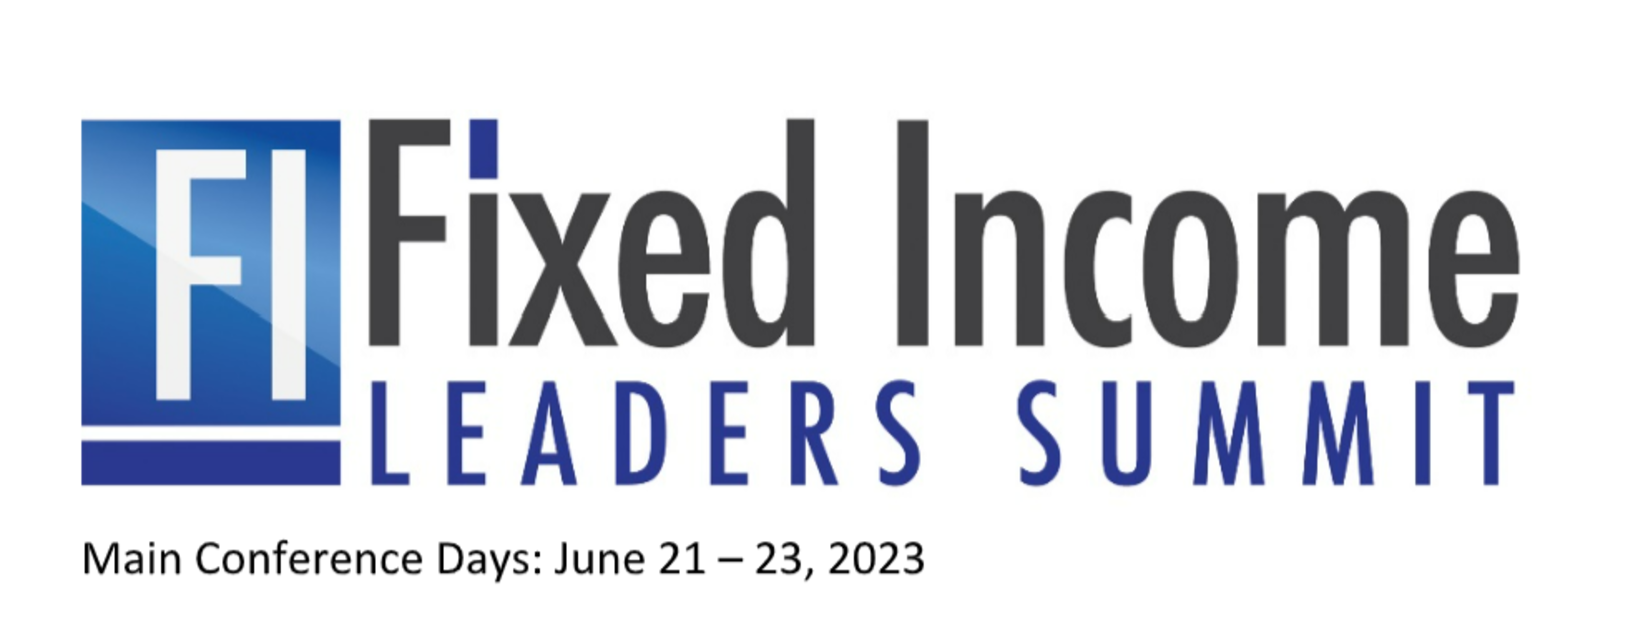 Fixed Leaders Summit 2023 Join the biggest Buy Side Fixed